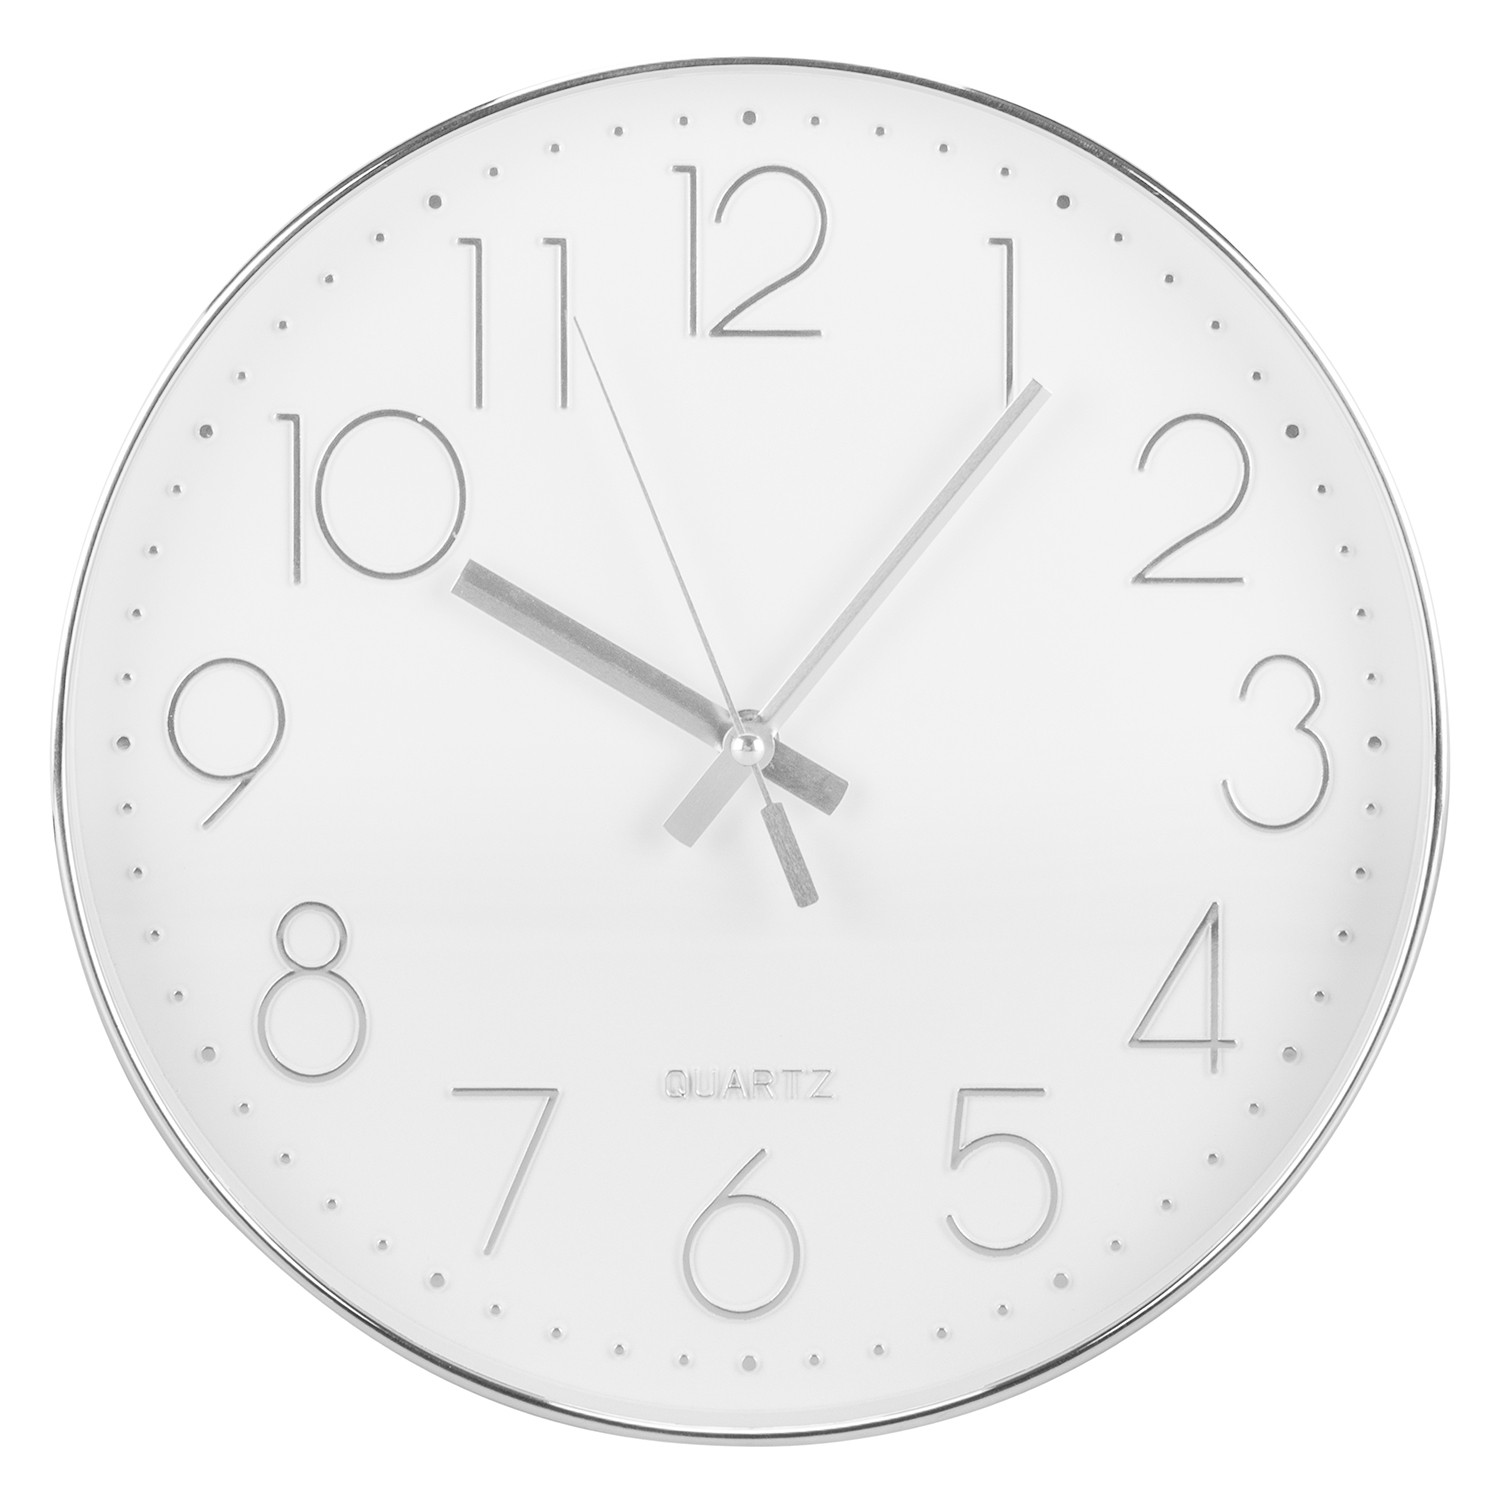 Silver Numbers Wall Clock Image